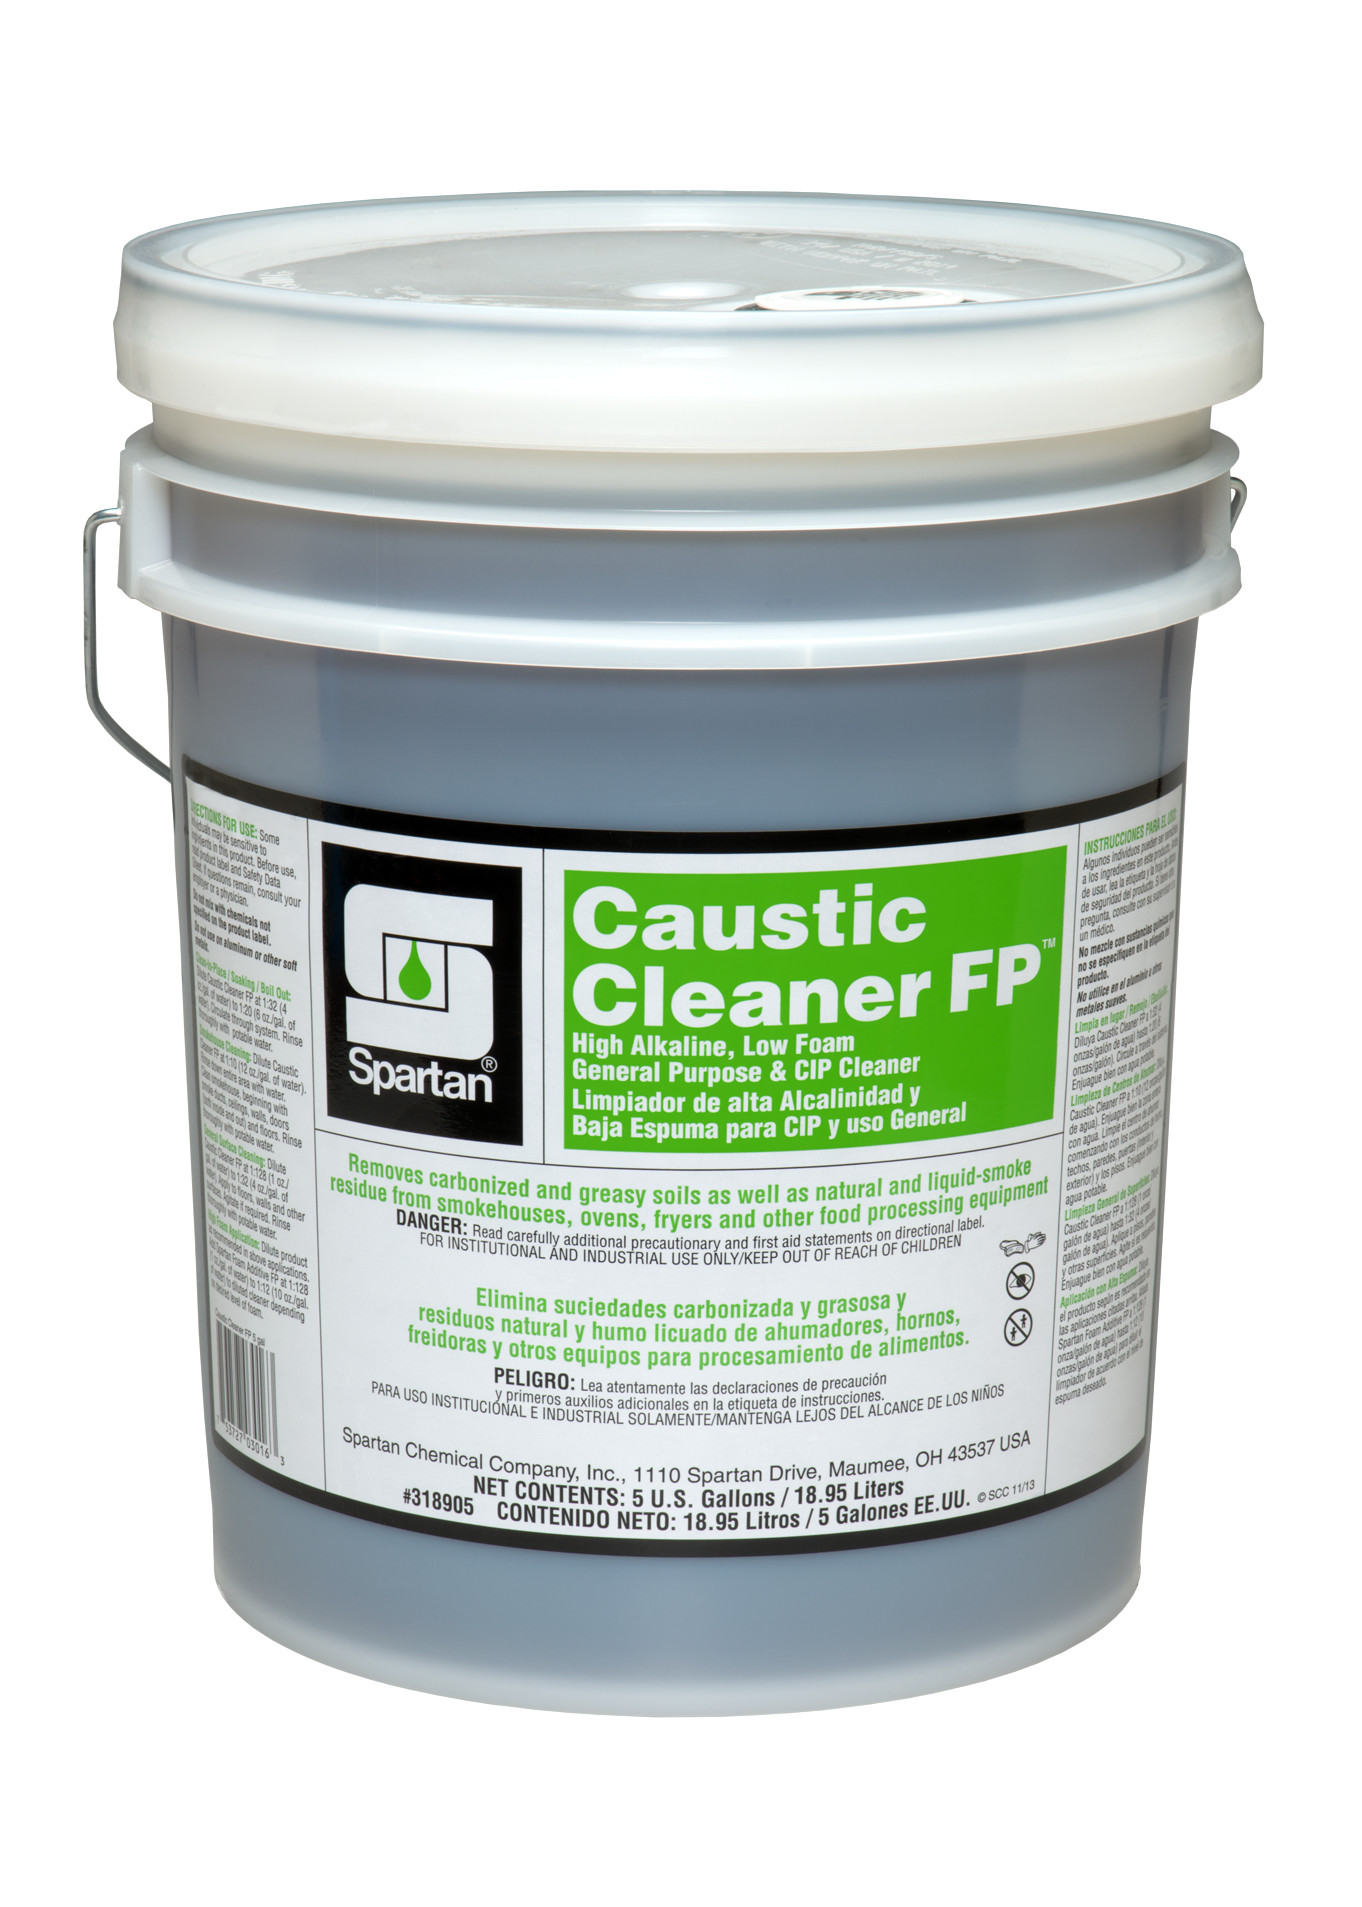 Spartan Chemical Company Caustic Cleaner FP, 5 GAL PAIL